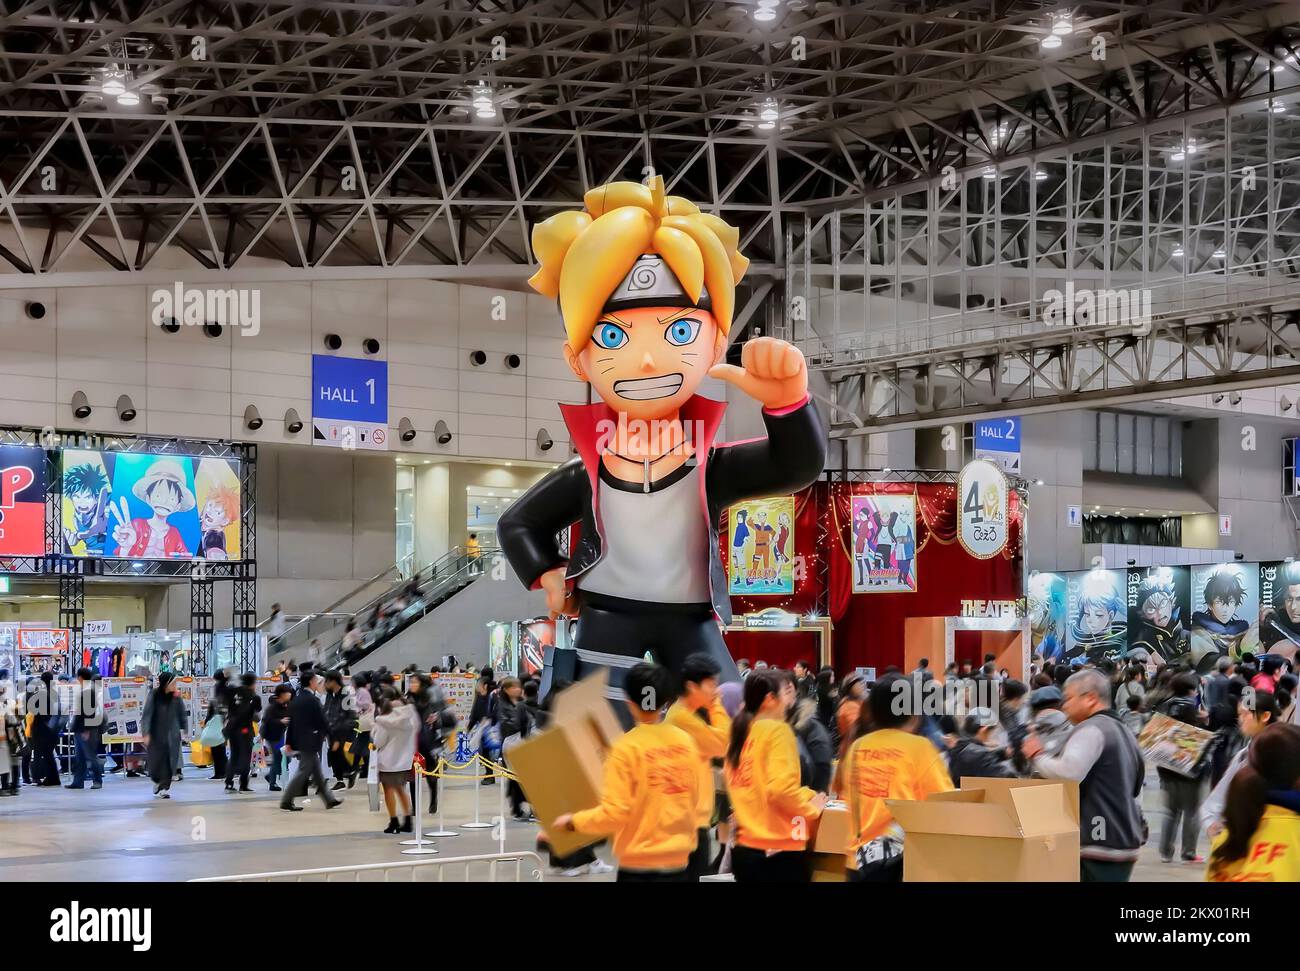 chiba, japan - dec 22 2018: Huge inflatable structure featuring the ninja character Boruto or Bolt Uzumaki from the anime and manga serie Naruto overl Stock Photo